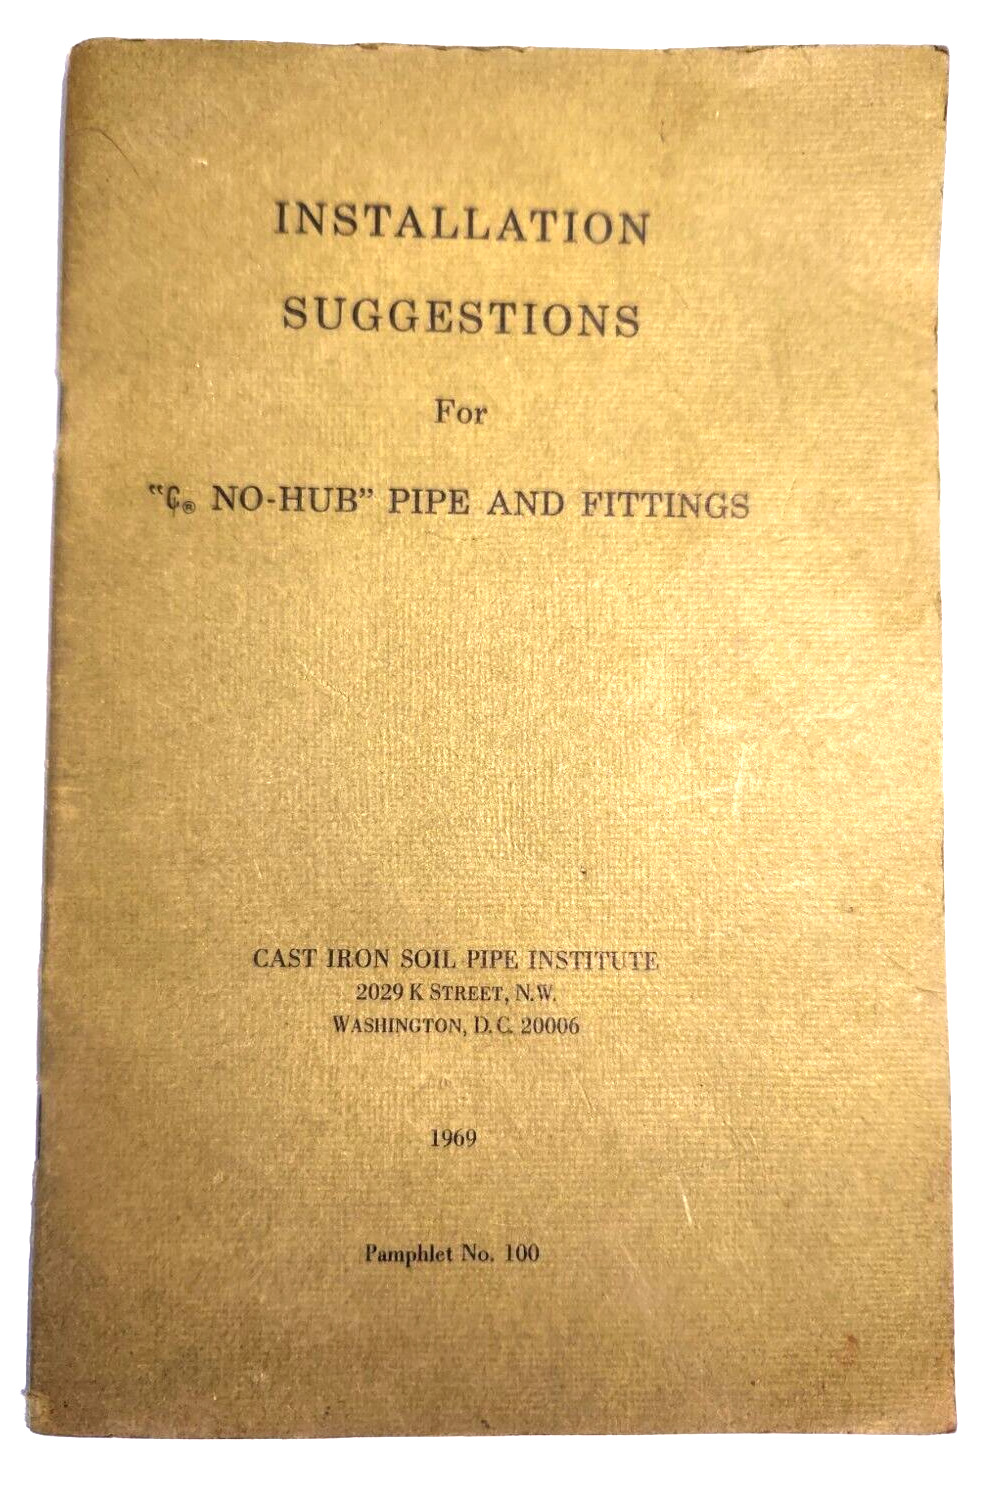 Installation Suggestions for C No-Hub Pipe and Fittings 20 pg Booklet 1969